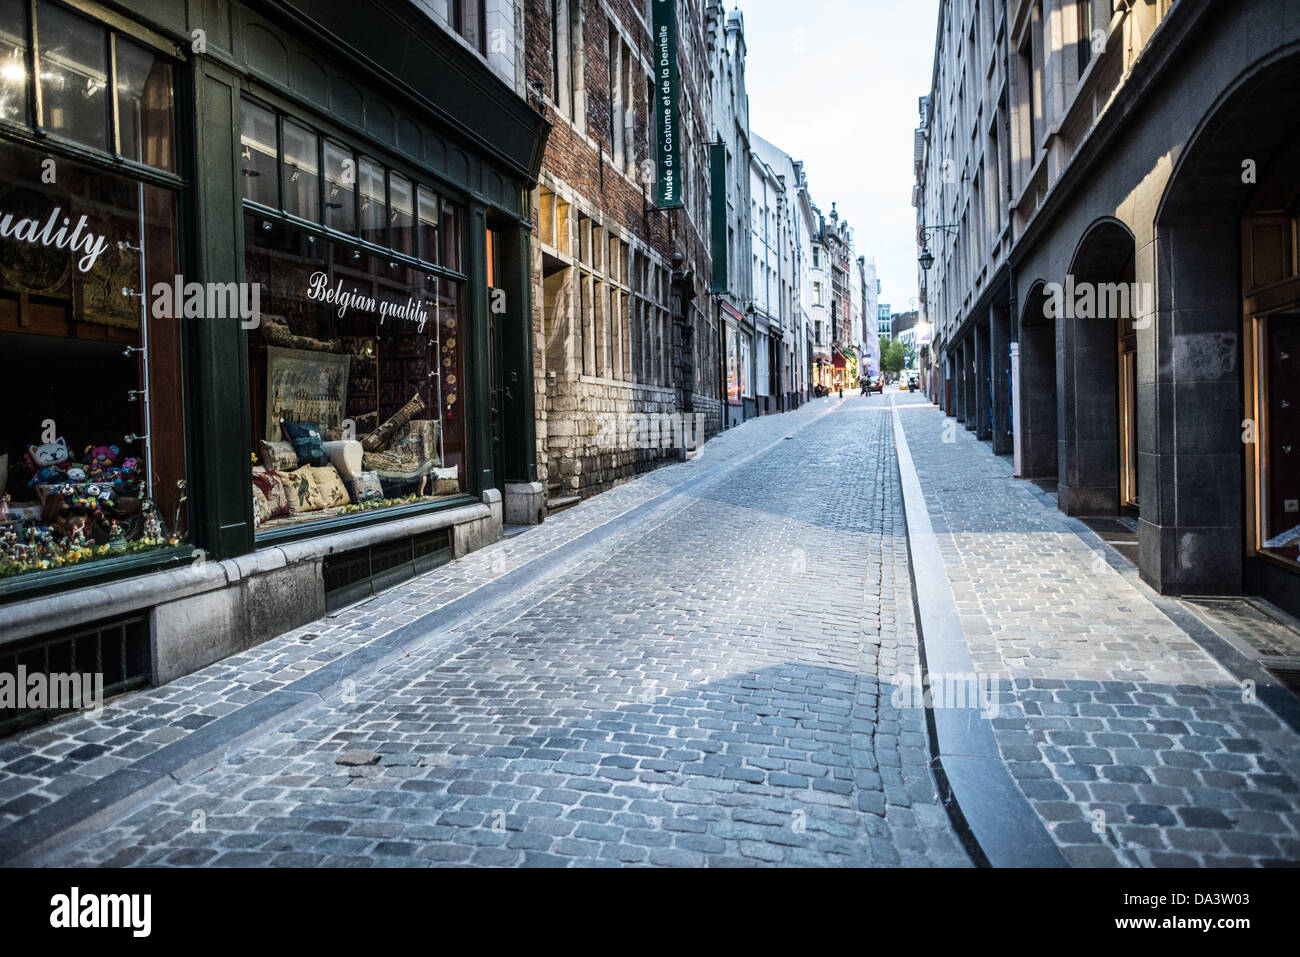 A deserted cobblestone street in the old town section of Lower Town ...